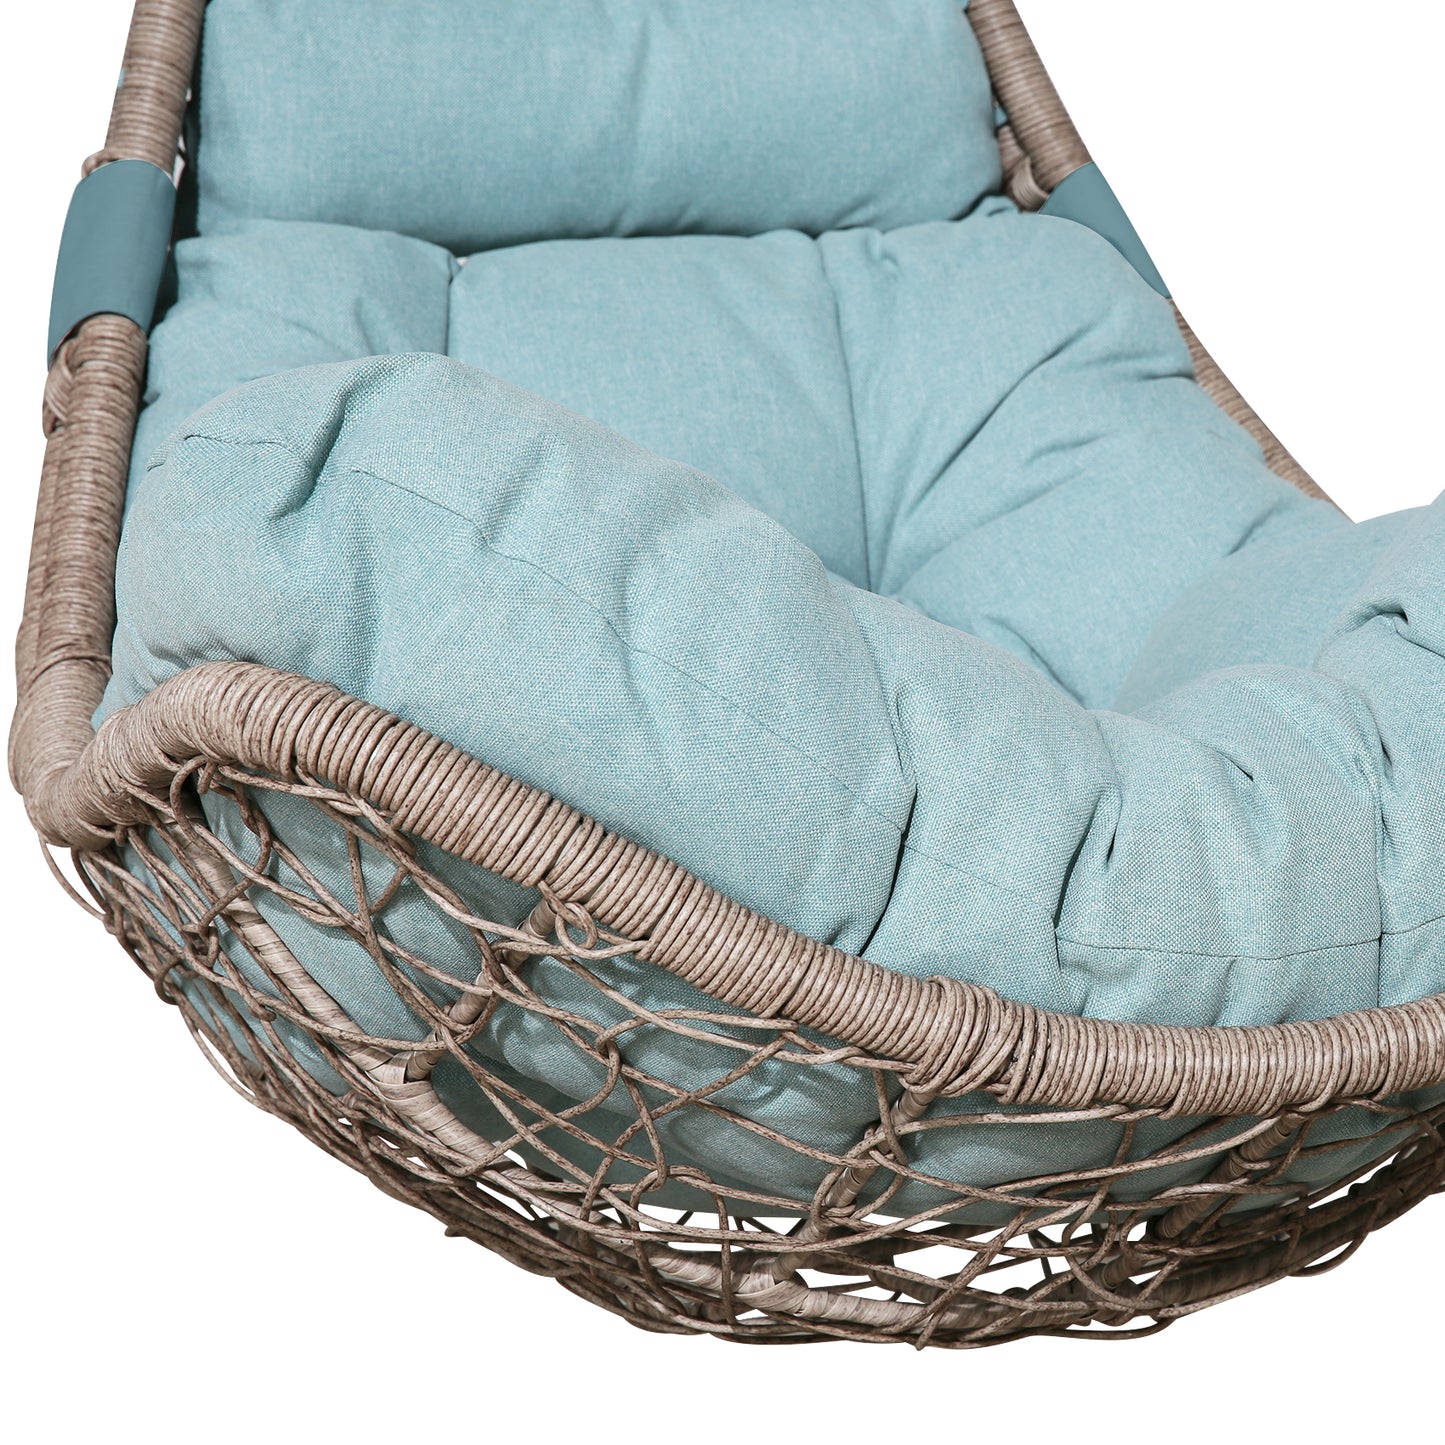 Outdoor Hanging Chair, Patio Wicker Hanging Basket Chair Swing with Steel Suspension Chain(Blue)